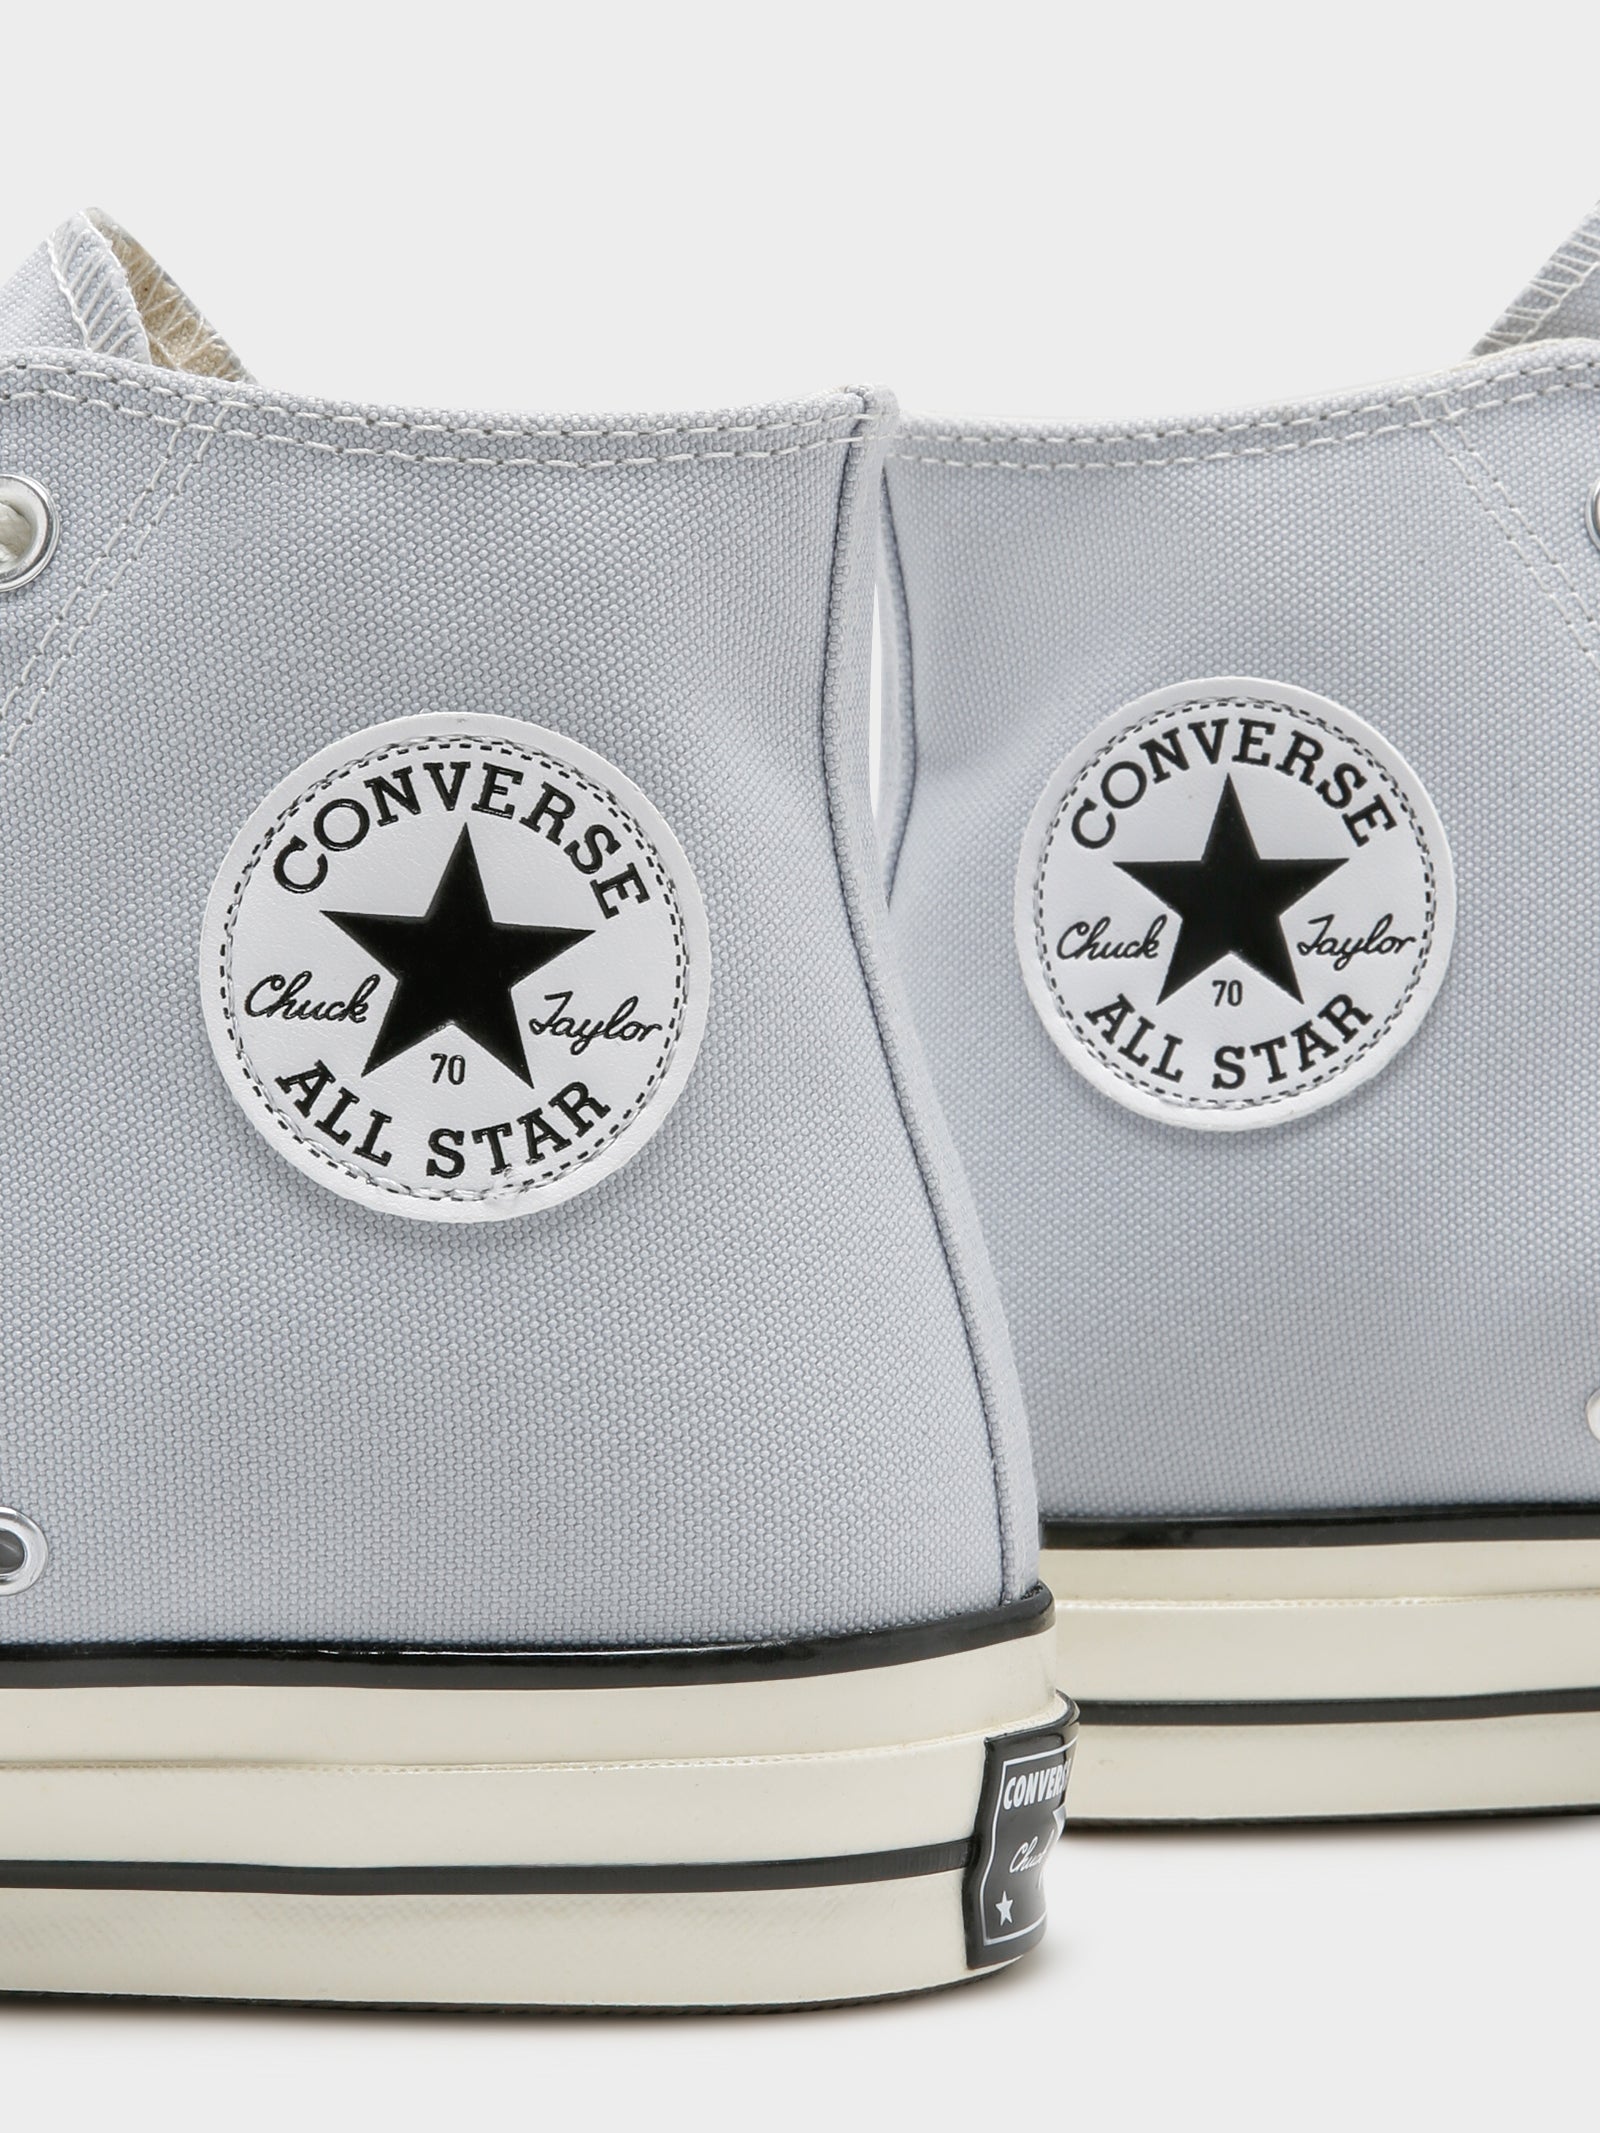 Unisex Chuck 70 High Sneakers in Summit Grey